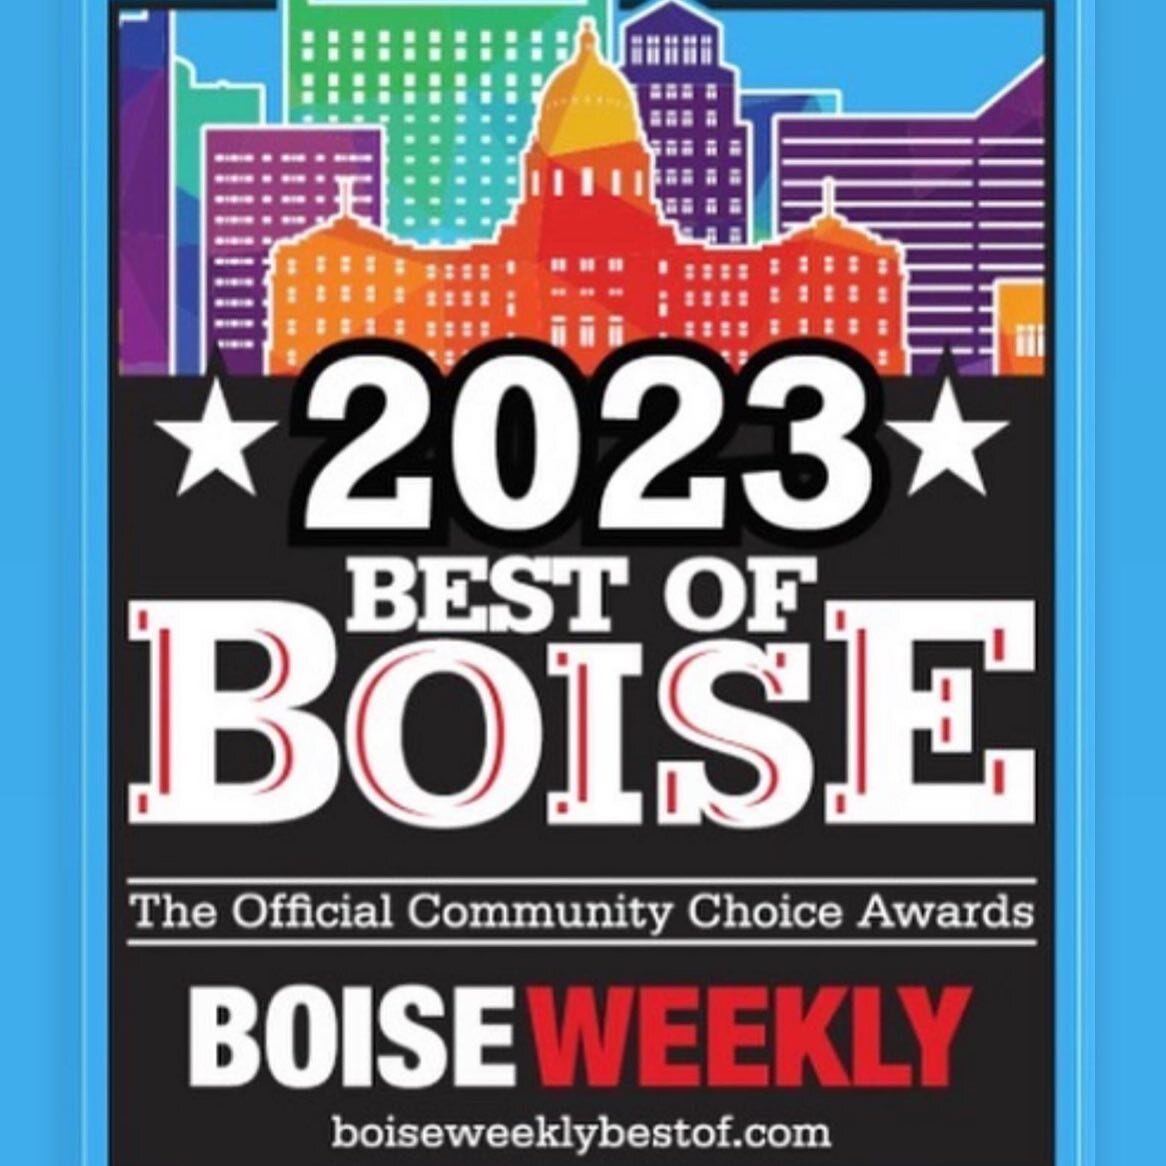 Once AGAIN FOR THE THIRD YEAR!! Please go vote for Stature we are under three categories 

Under beauty and health 
For 
Best Barber shop
&amp;
Best Hair salon 

And under people for best hairstylist vote for @shelbysmartboise and @brittanee.boisehai